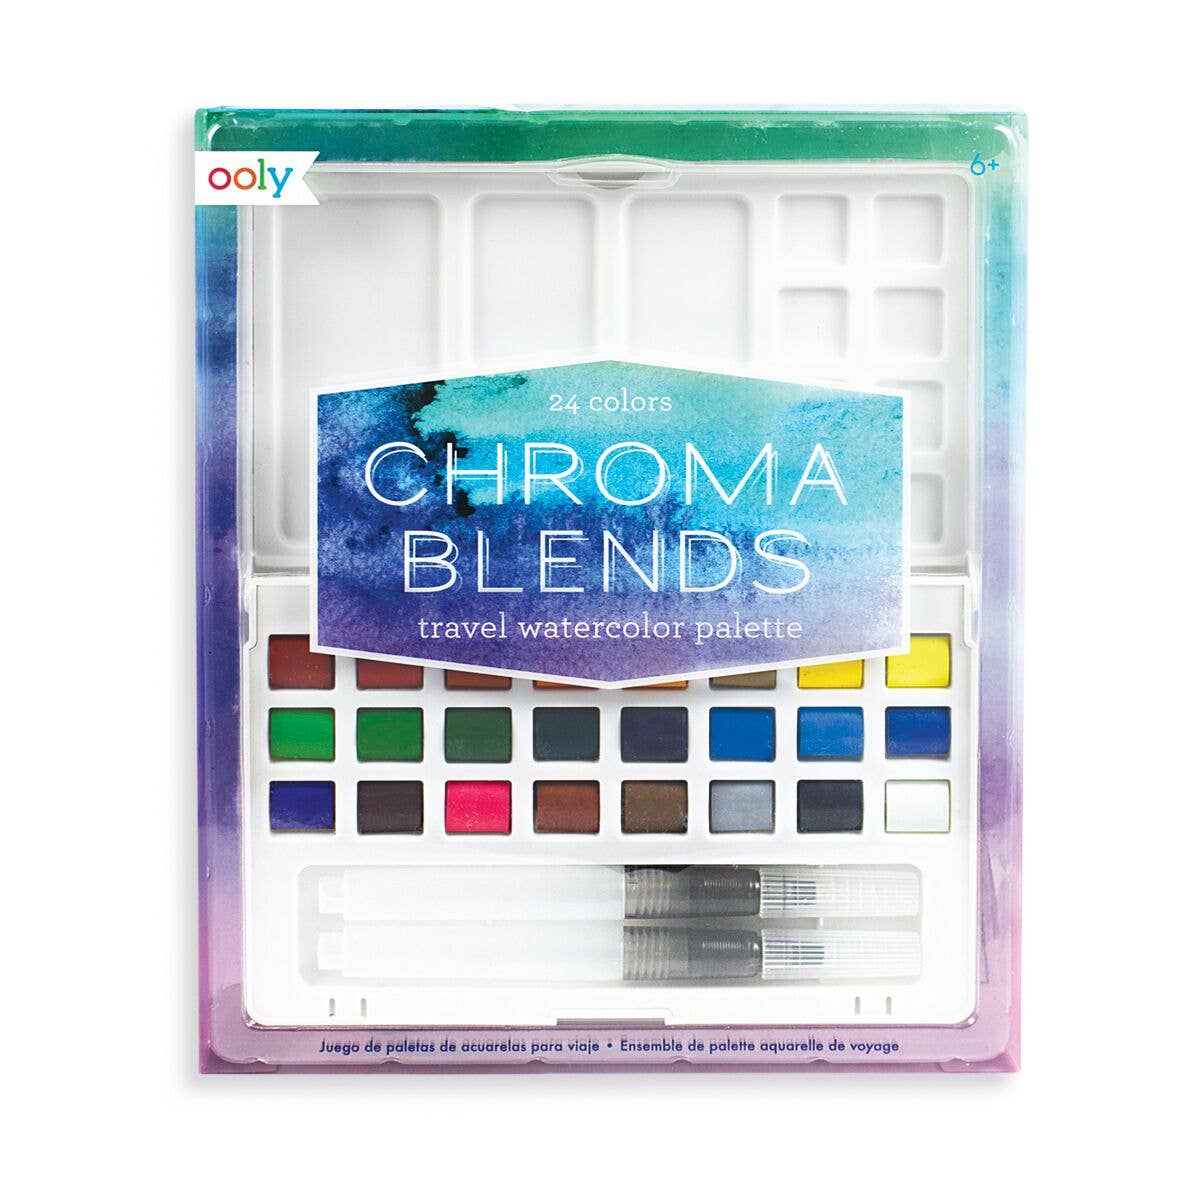 Chroma Blends Circular Watercolor Paper - OOLY